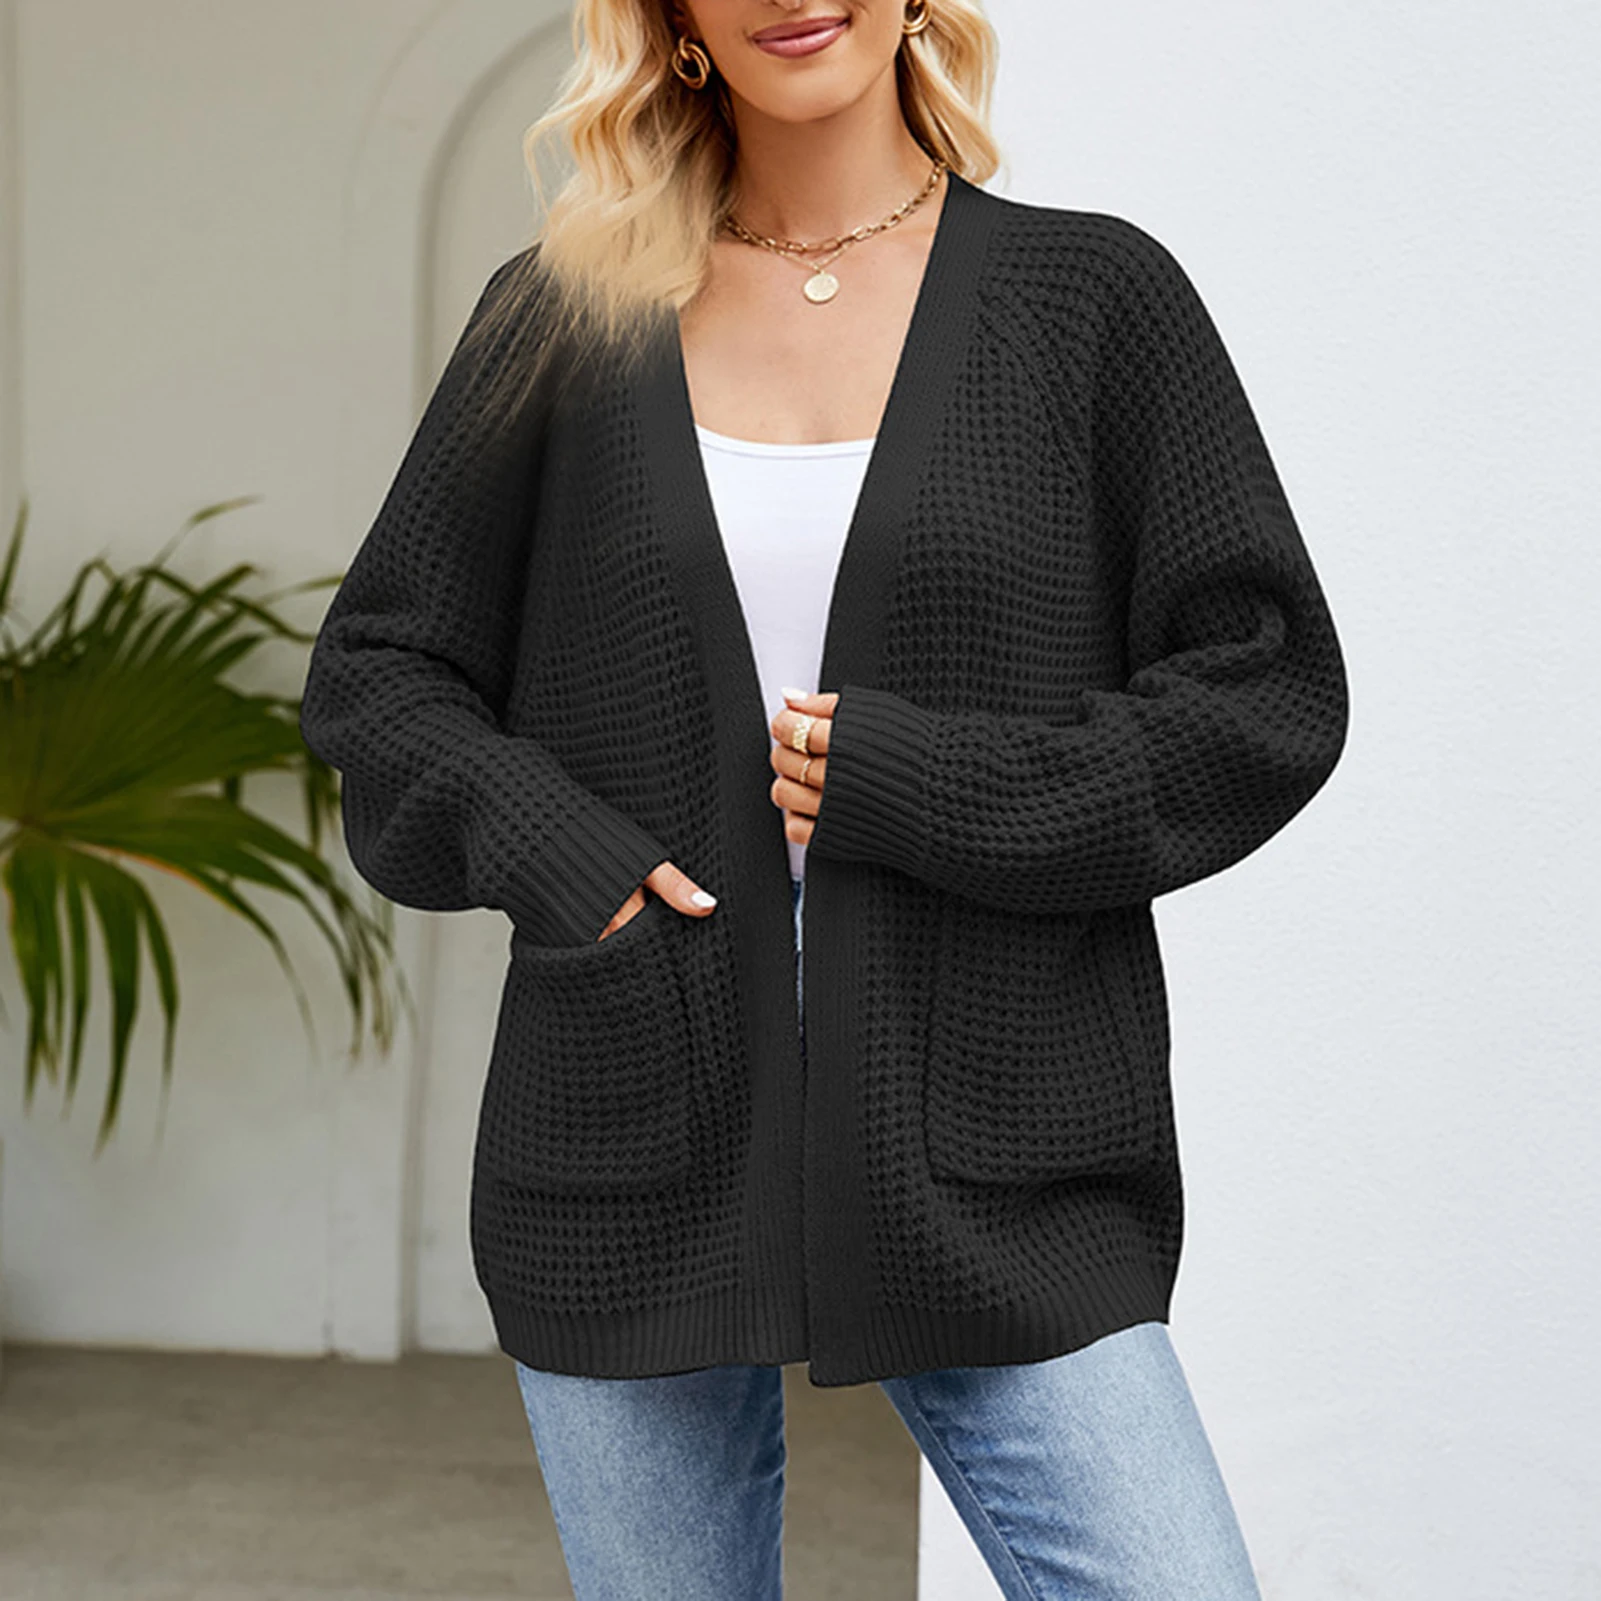 

Women Open Front Cardigans Soft Comfy Knit Retro Crochet Sweaters with Pockets Autumn Winter Outerwears Fashion Versatile Coats